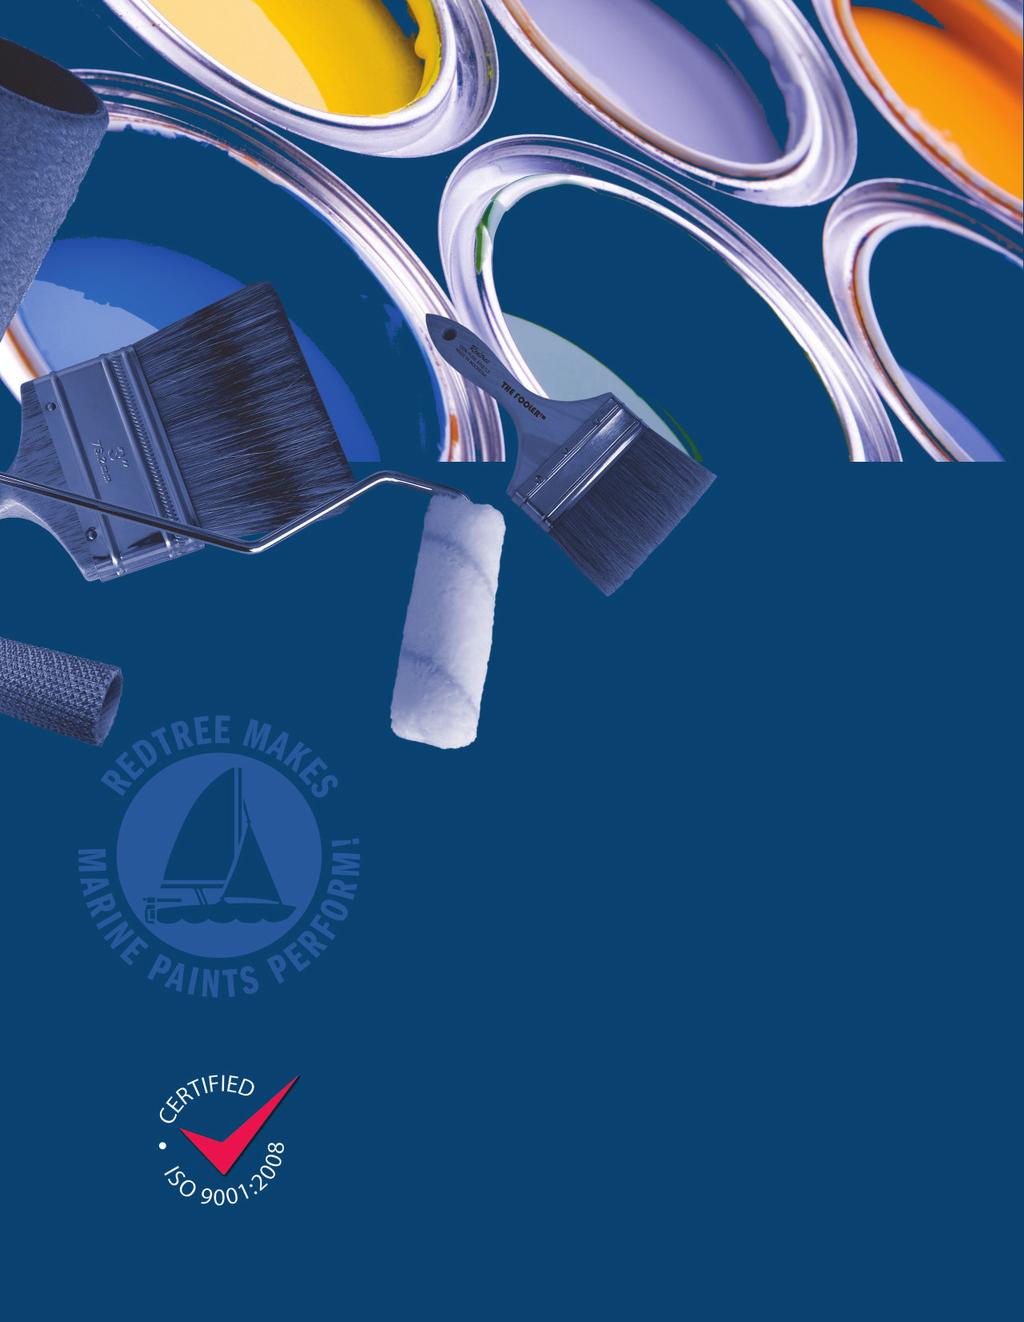 Brushes and Rollers Specially Designed for Marine Paints Redtree manufactures a complete line of the finest tools compatible with all types of marine coatings from topside finishes to antifouling